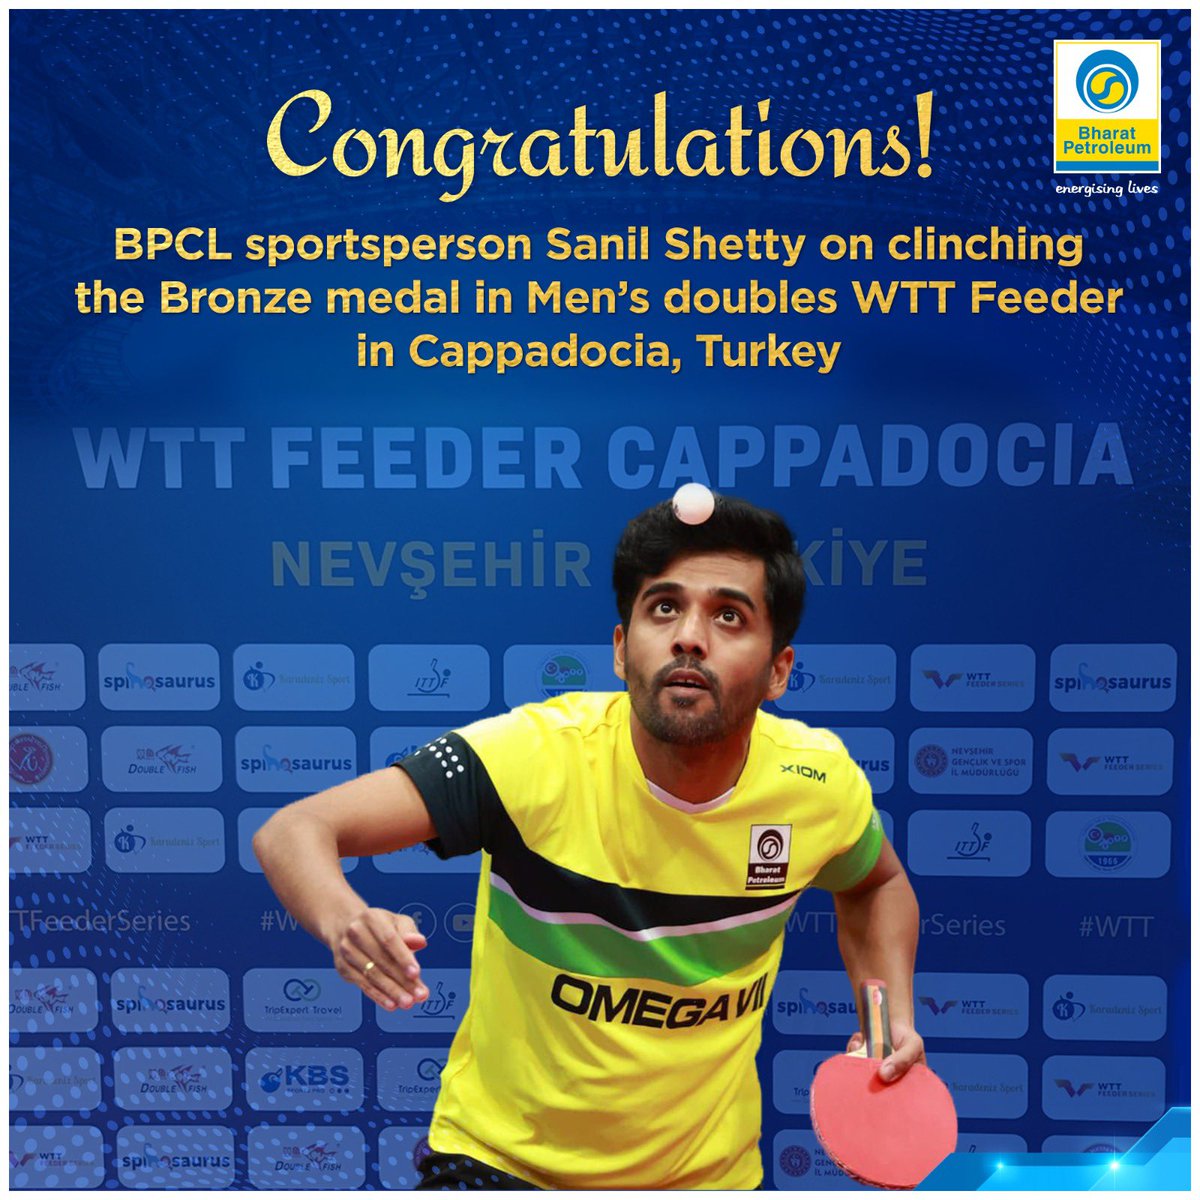 Heartiest Congratulations to BPCL’s sportsperson Sanil Shetty for winning the Bronze medal in Men’s Doubles Table Tennis at the WTT Feeder Championships in Cappadocia, Turkey! Your hard work and dedication have paid off! @ShettySanilTT #TableTennis #BronzeMedalist #ProudMoment